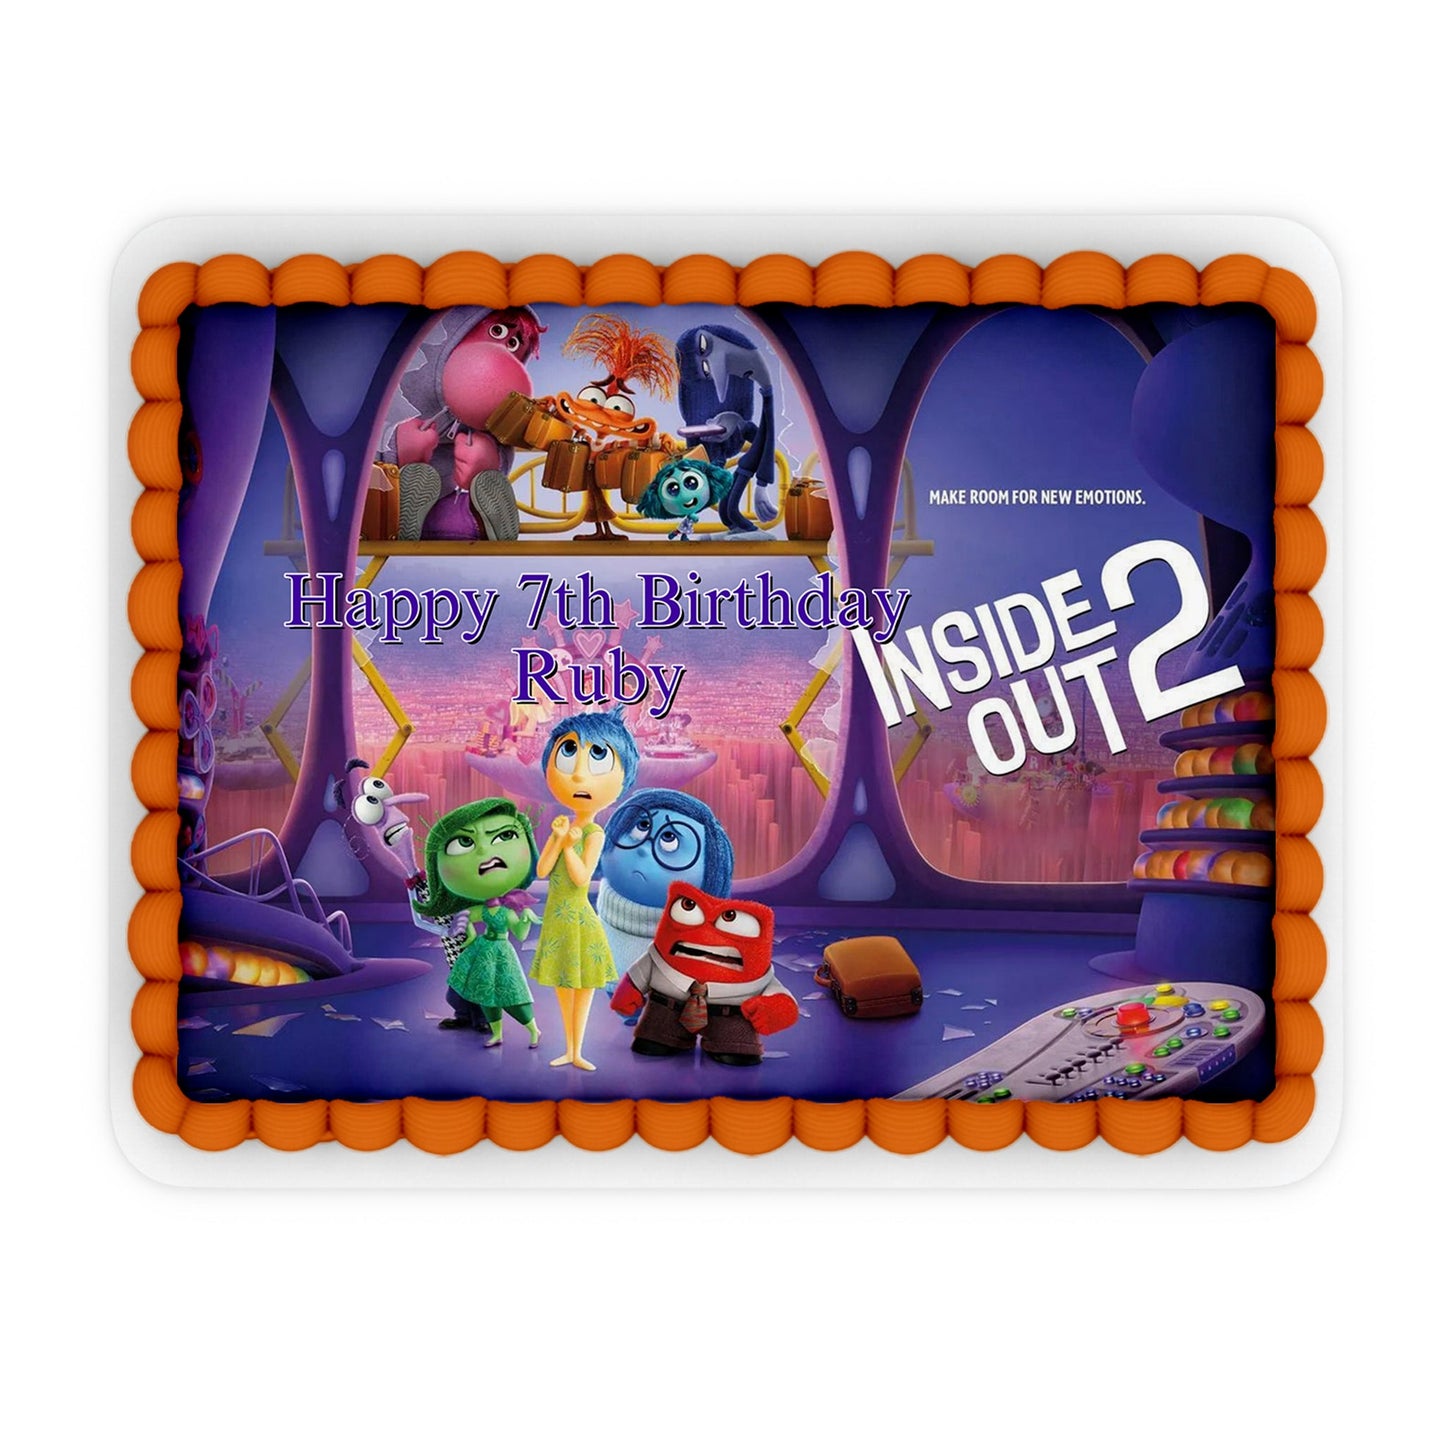 Rectangle personalized edible sheet cake images featuring Inside Out movie theme